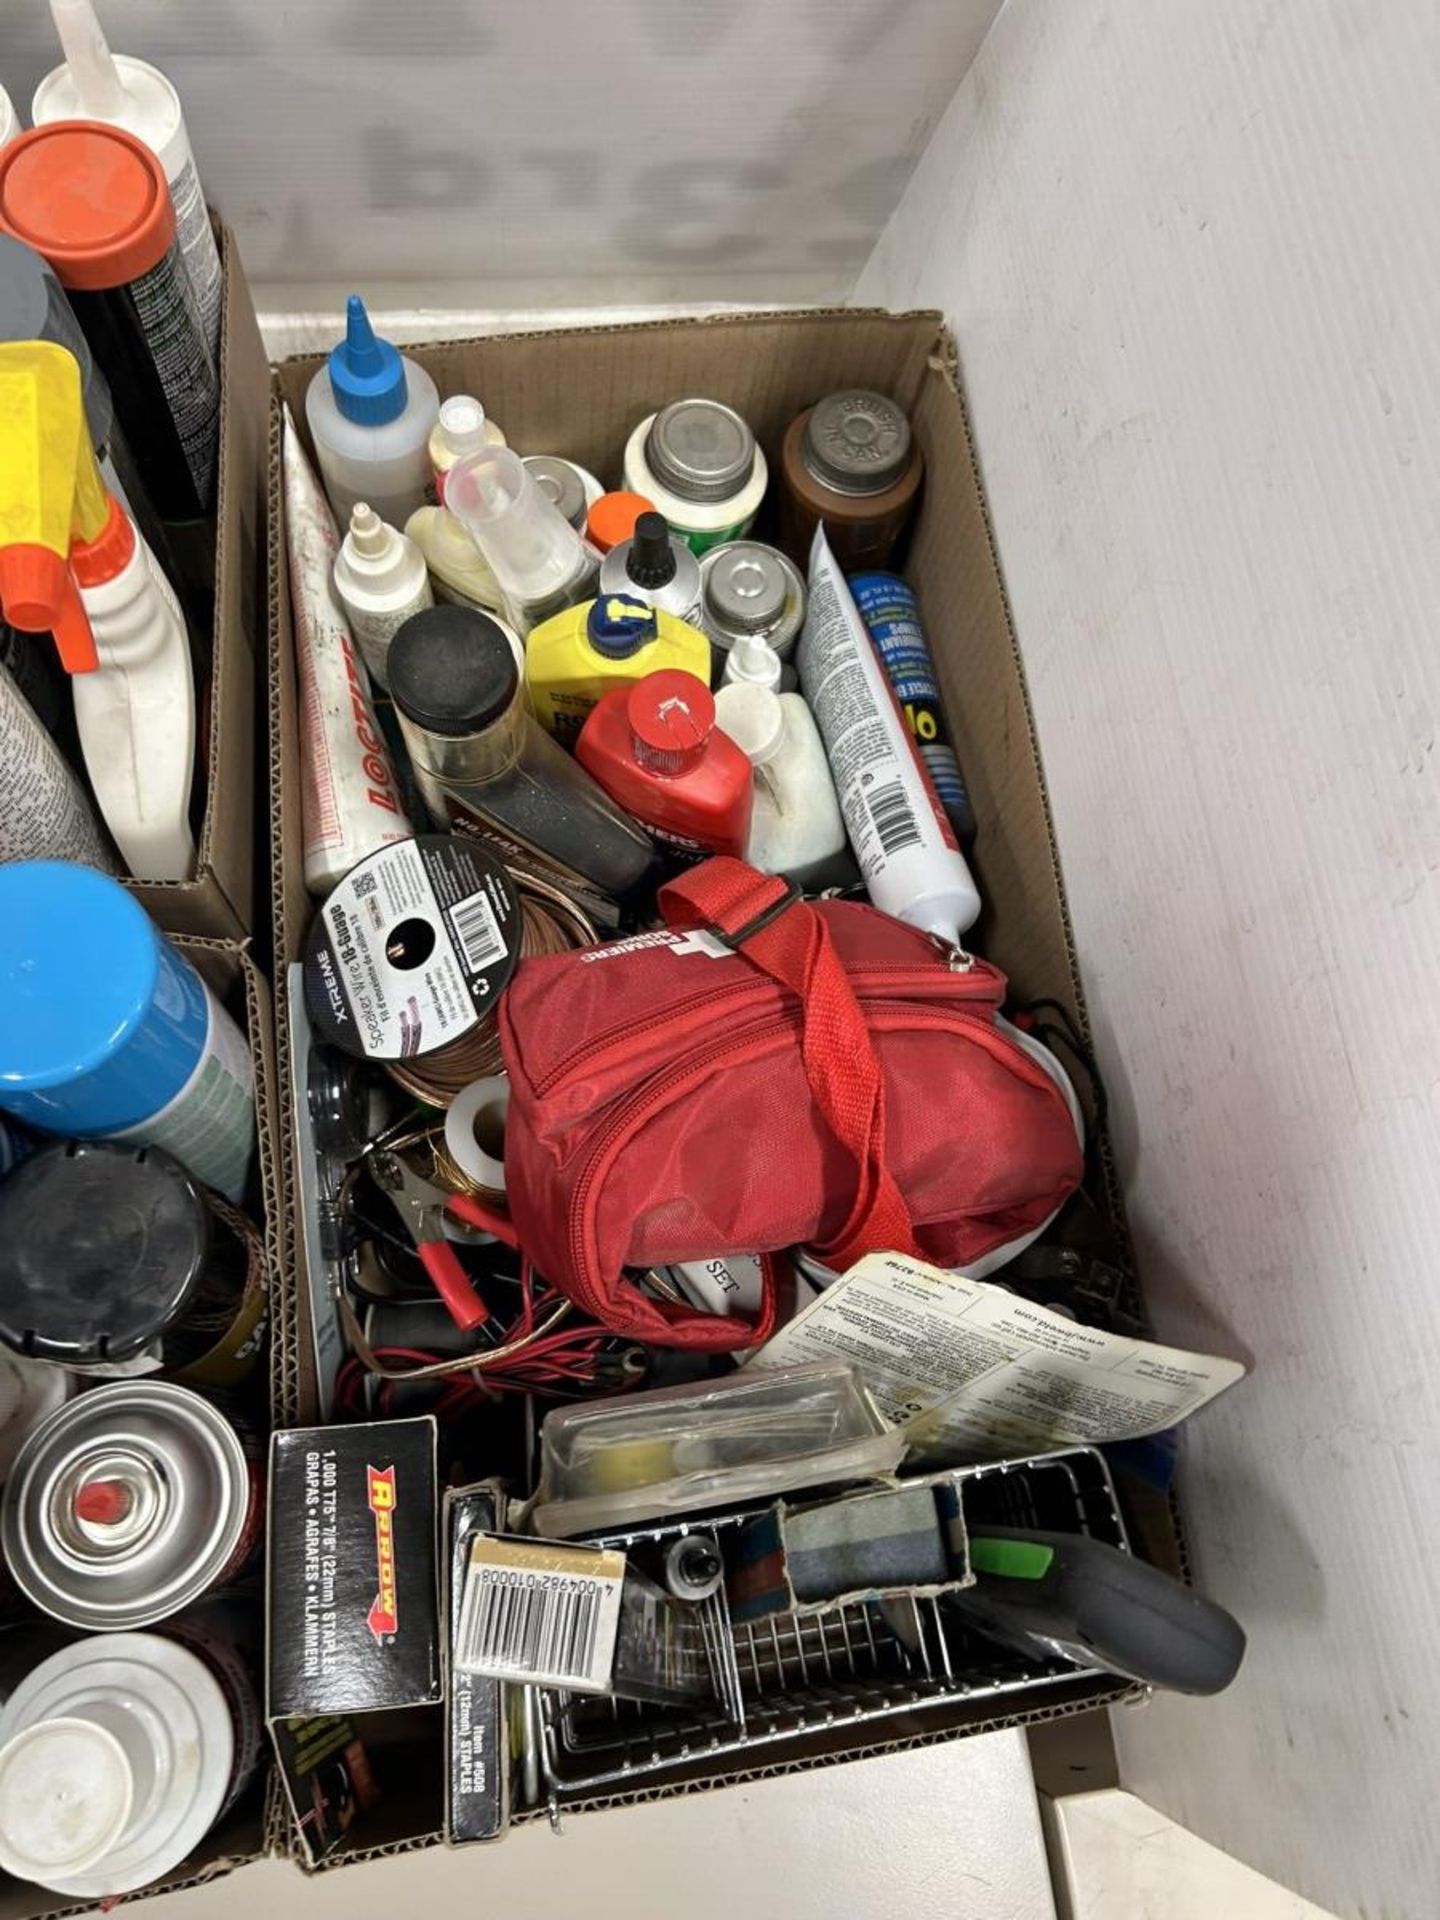 L/O ASSORTED FLUIDS, LUBRICANTS, SEALANT, FASTENERS, PAINT BRUSHES, ROLLERS, ETC. - Image 2 of 5